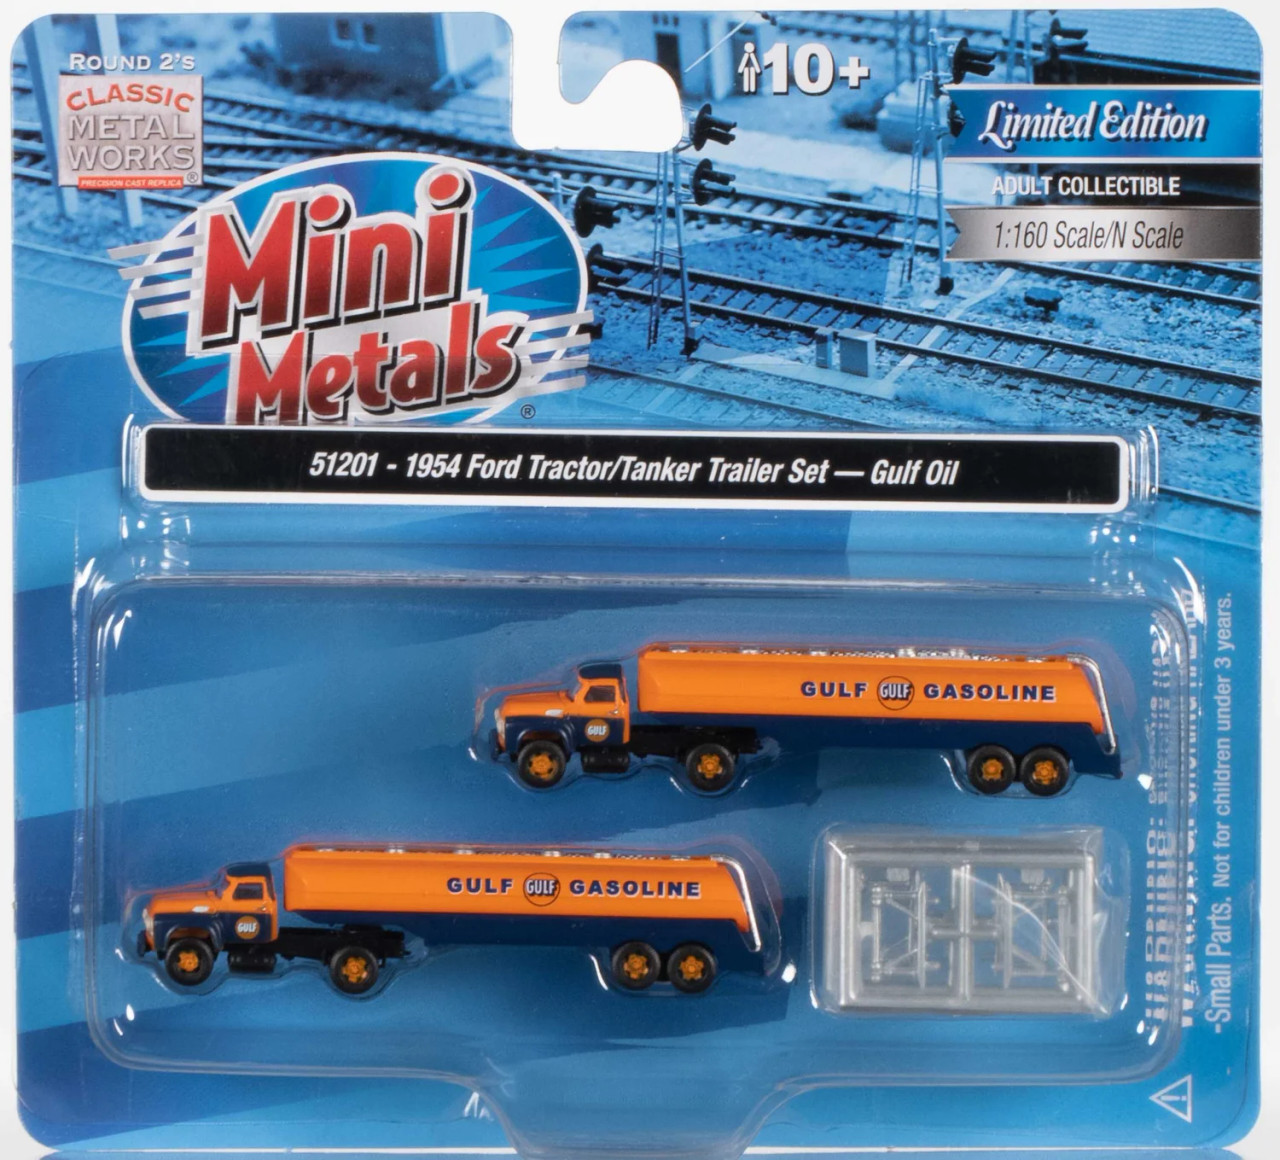 Classic Metal Works 51201 N 1954 Ford Tractor Tanker Trailer Set - Gulf Oil 2-Pack Package